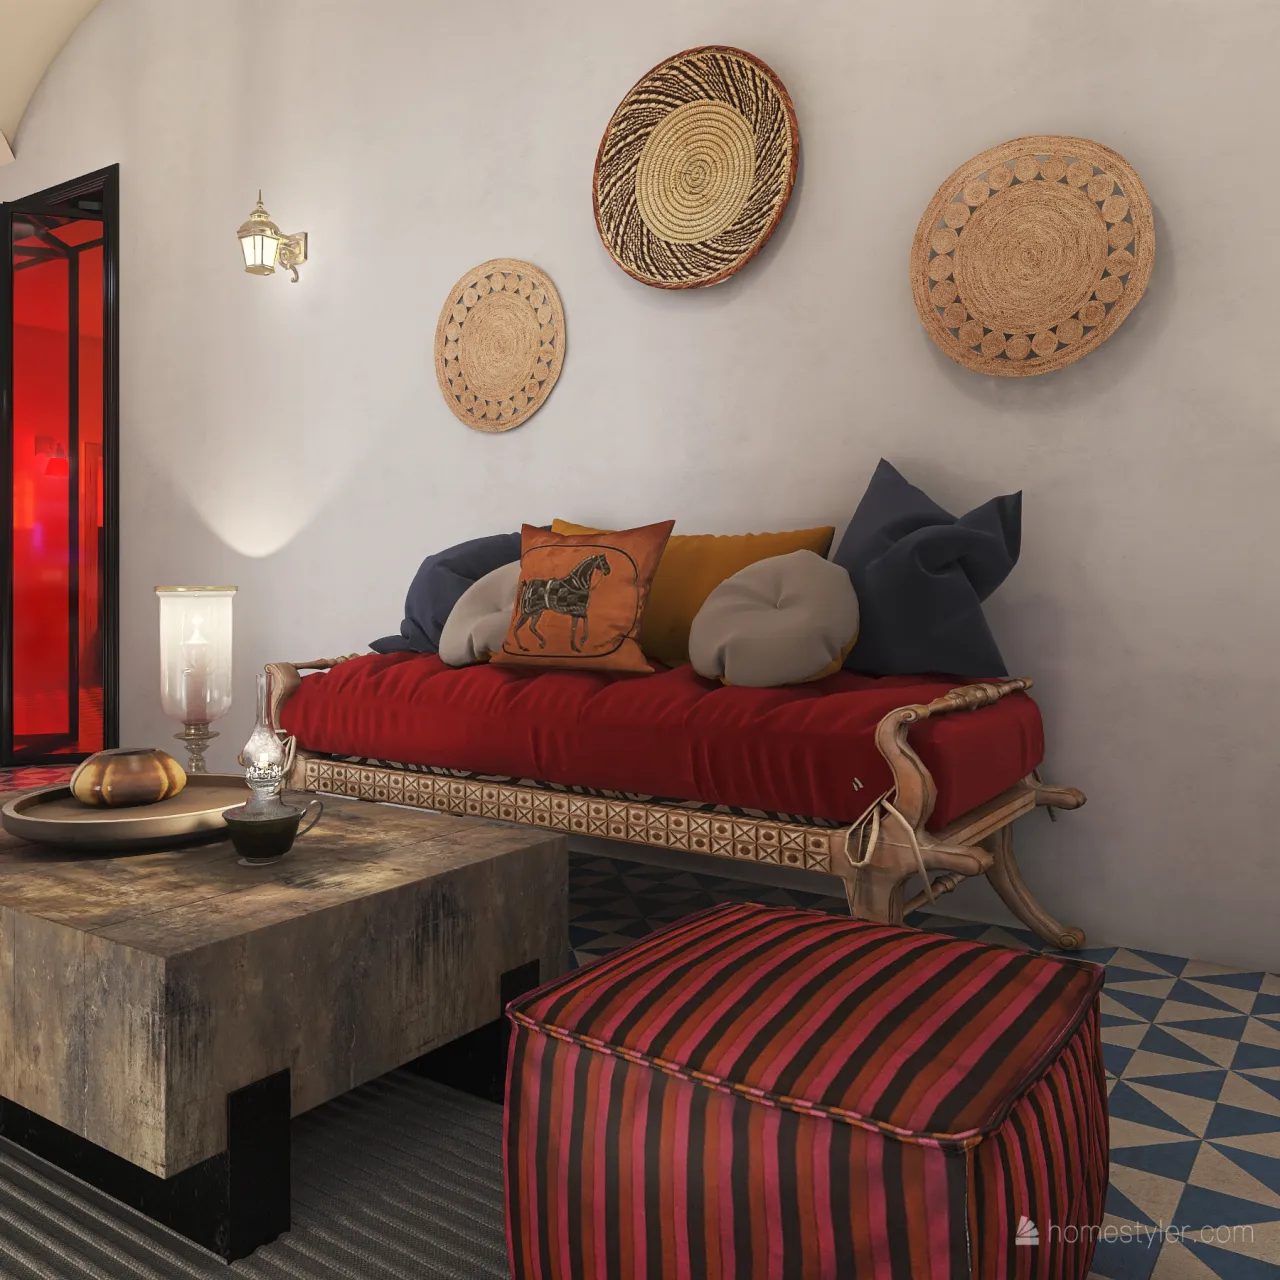 Modern StyleOther HSDA2020Commercial  MOROCCAN INSPIRED HOTEL Orange Blue White 3d design renderings